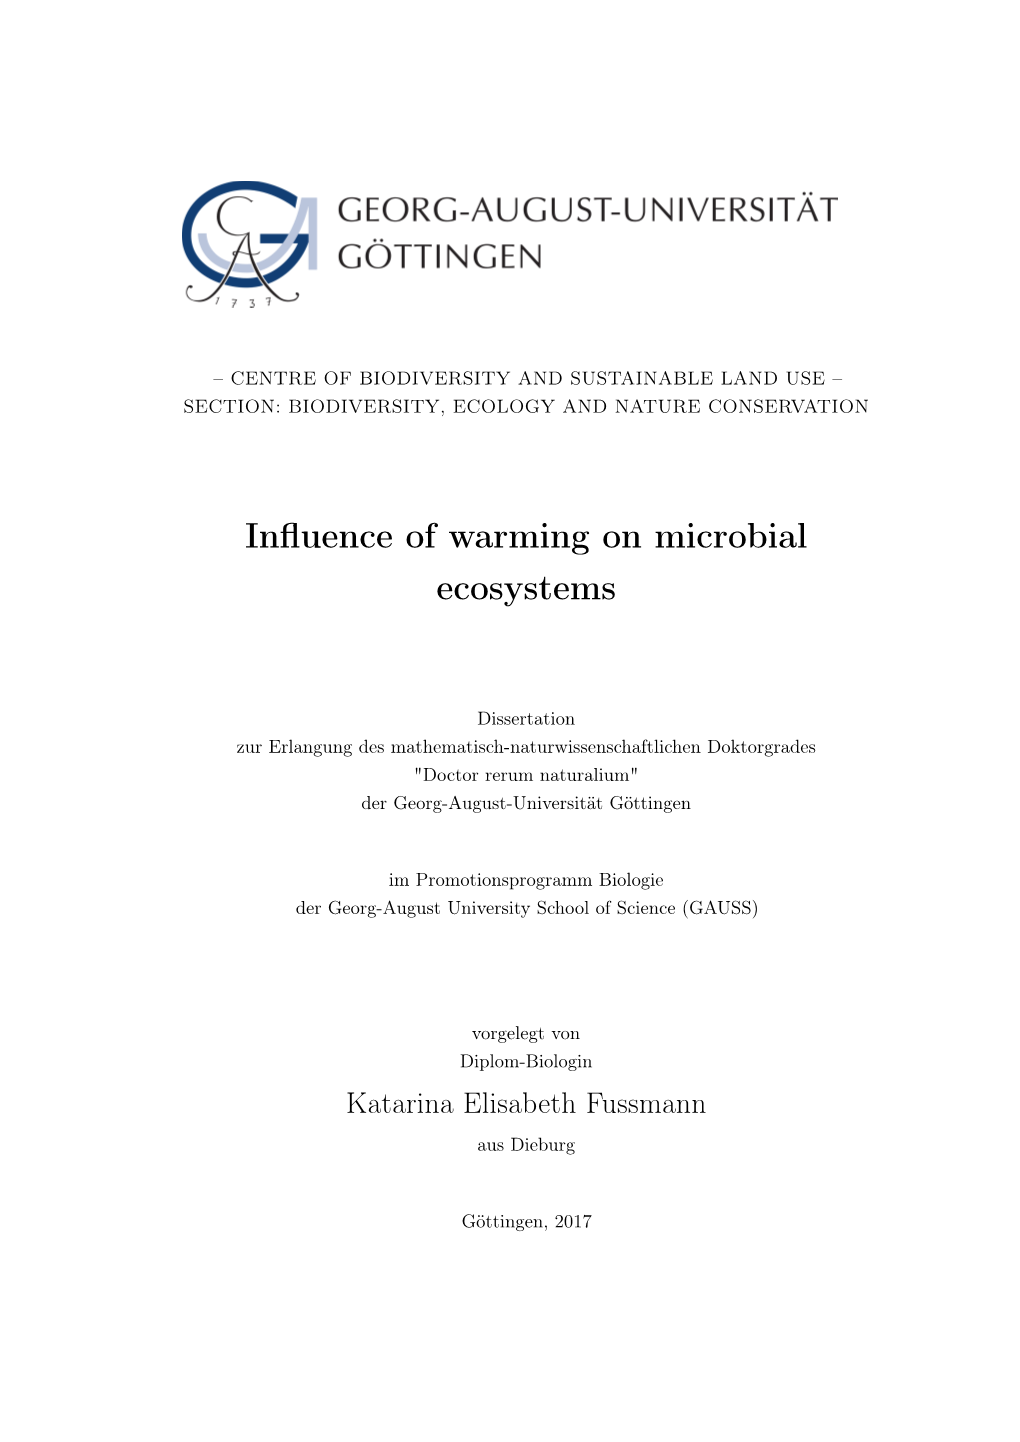 Influence of Warming on Microbial Ecosystems